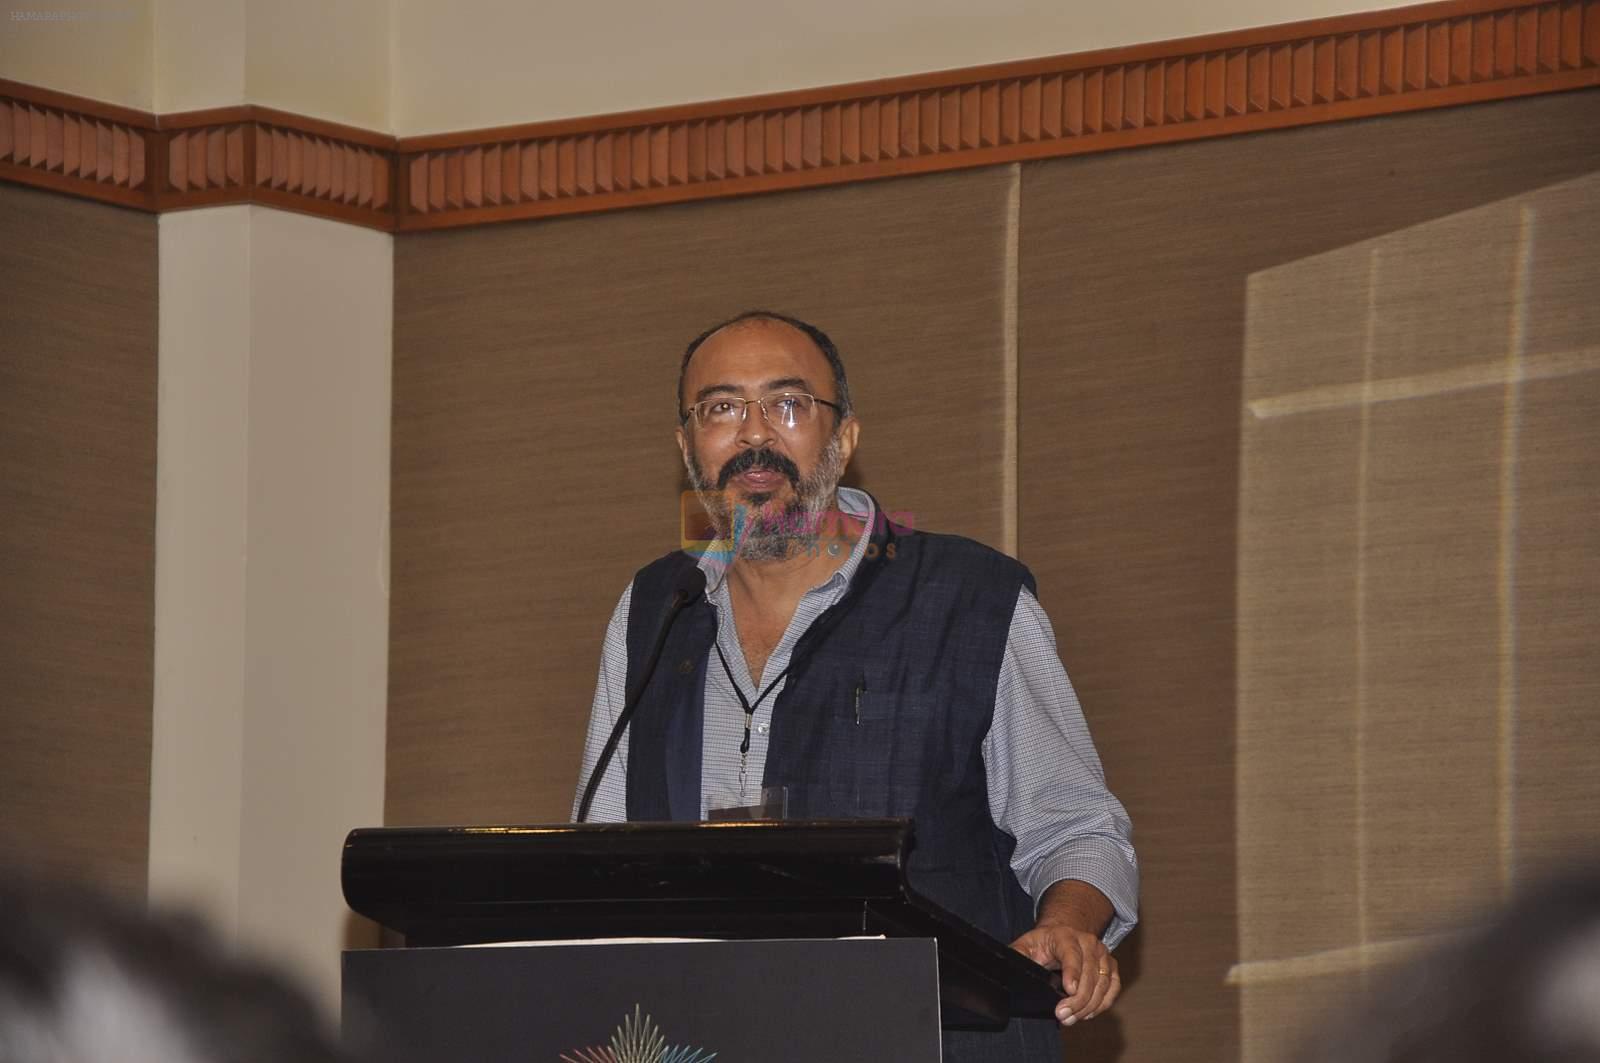 at Screenwriters meet in J W Marriott on 9th Aug 2015